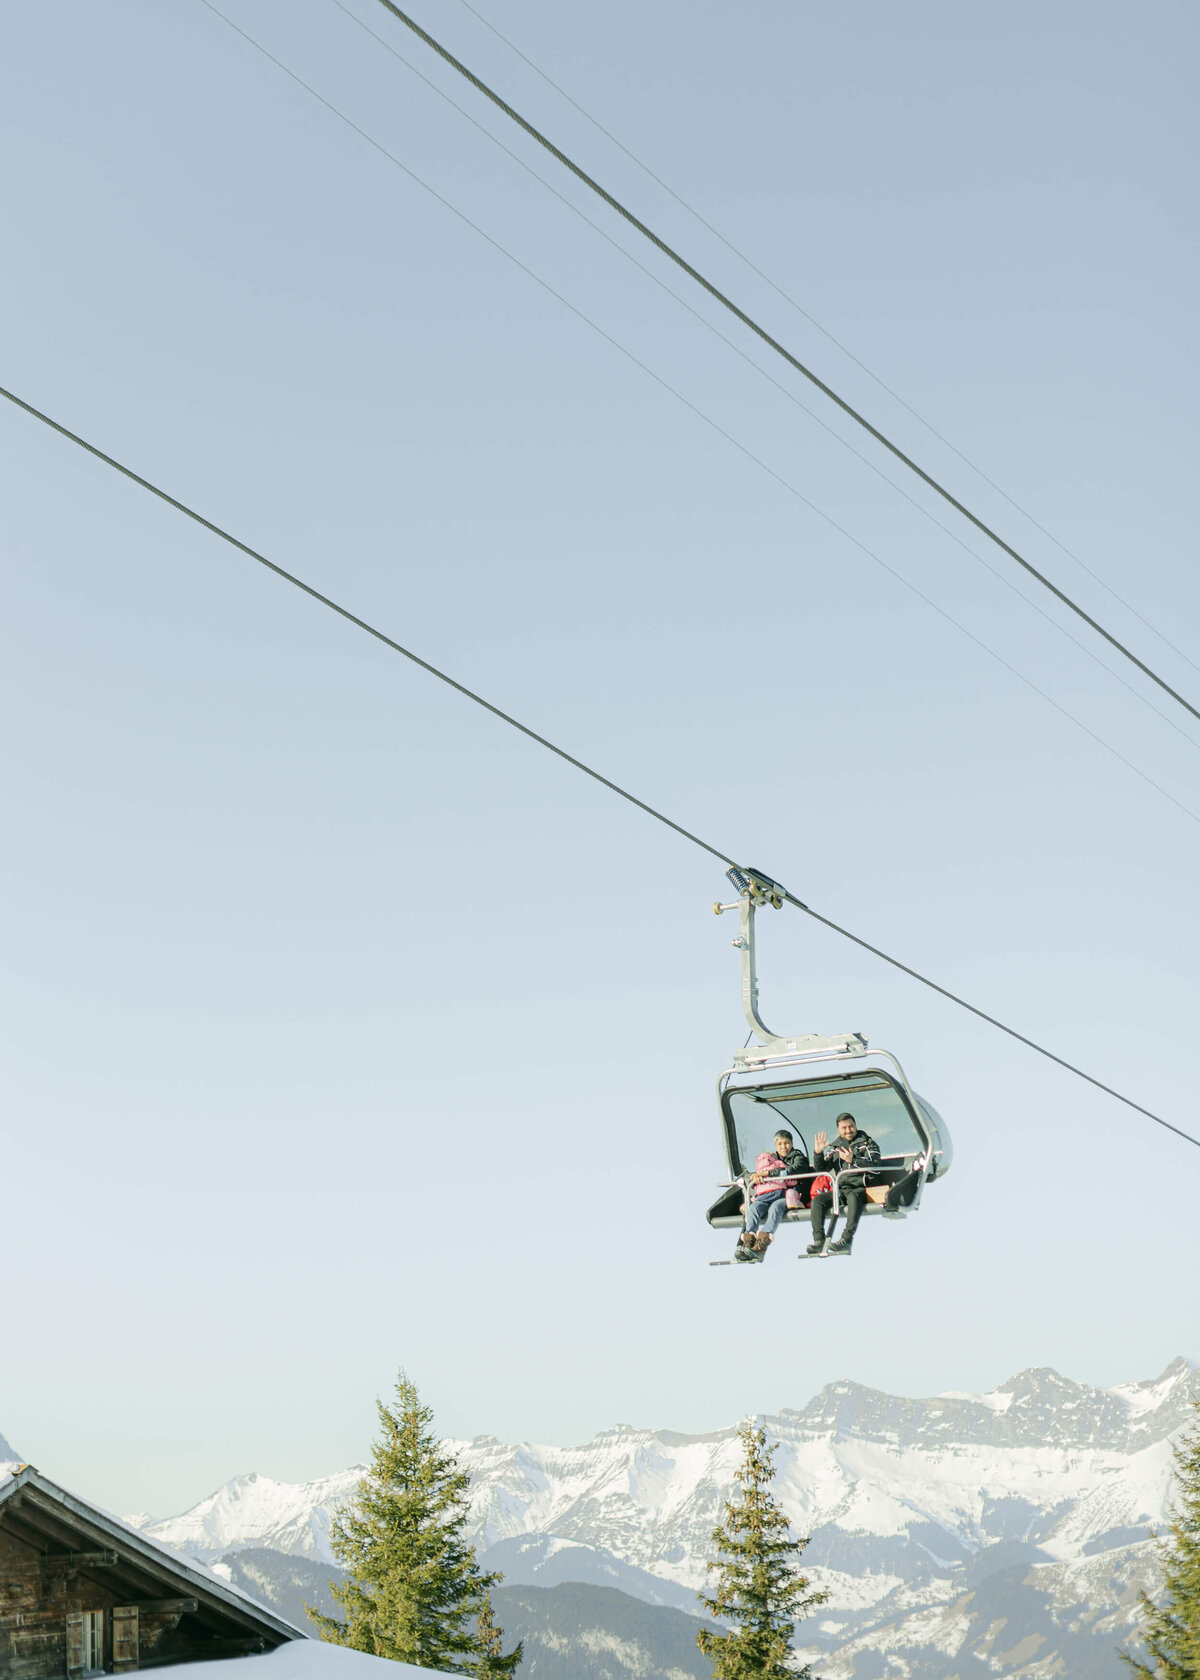 chloe-winstanley-events-gstaad-mountain-chairlift